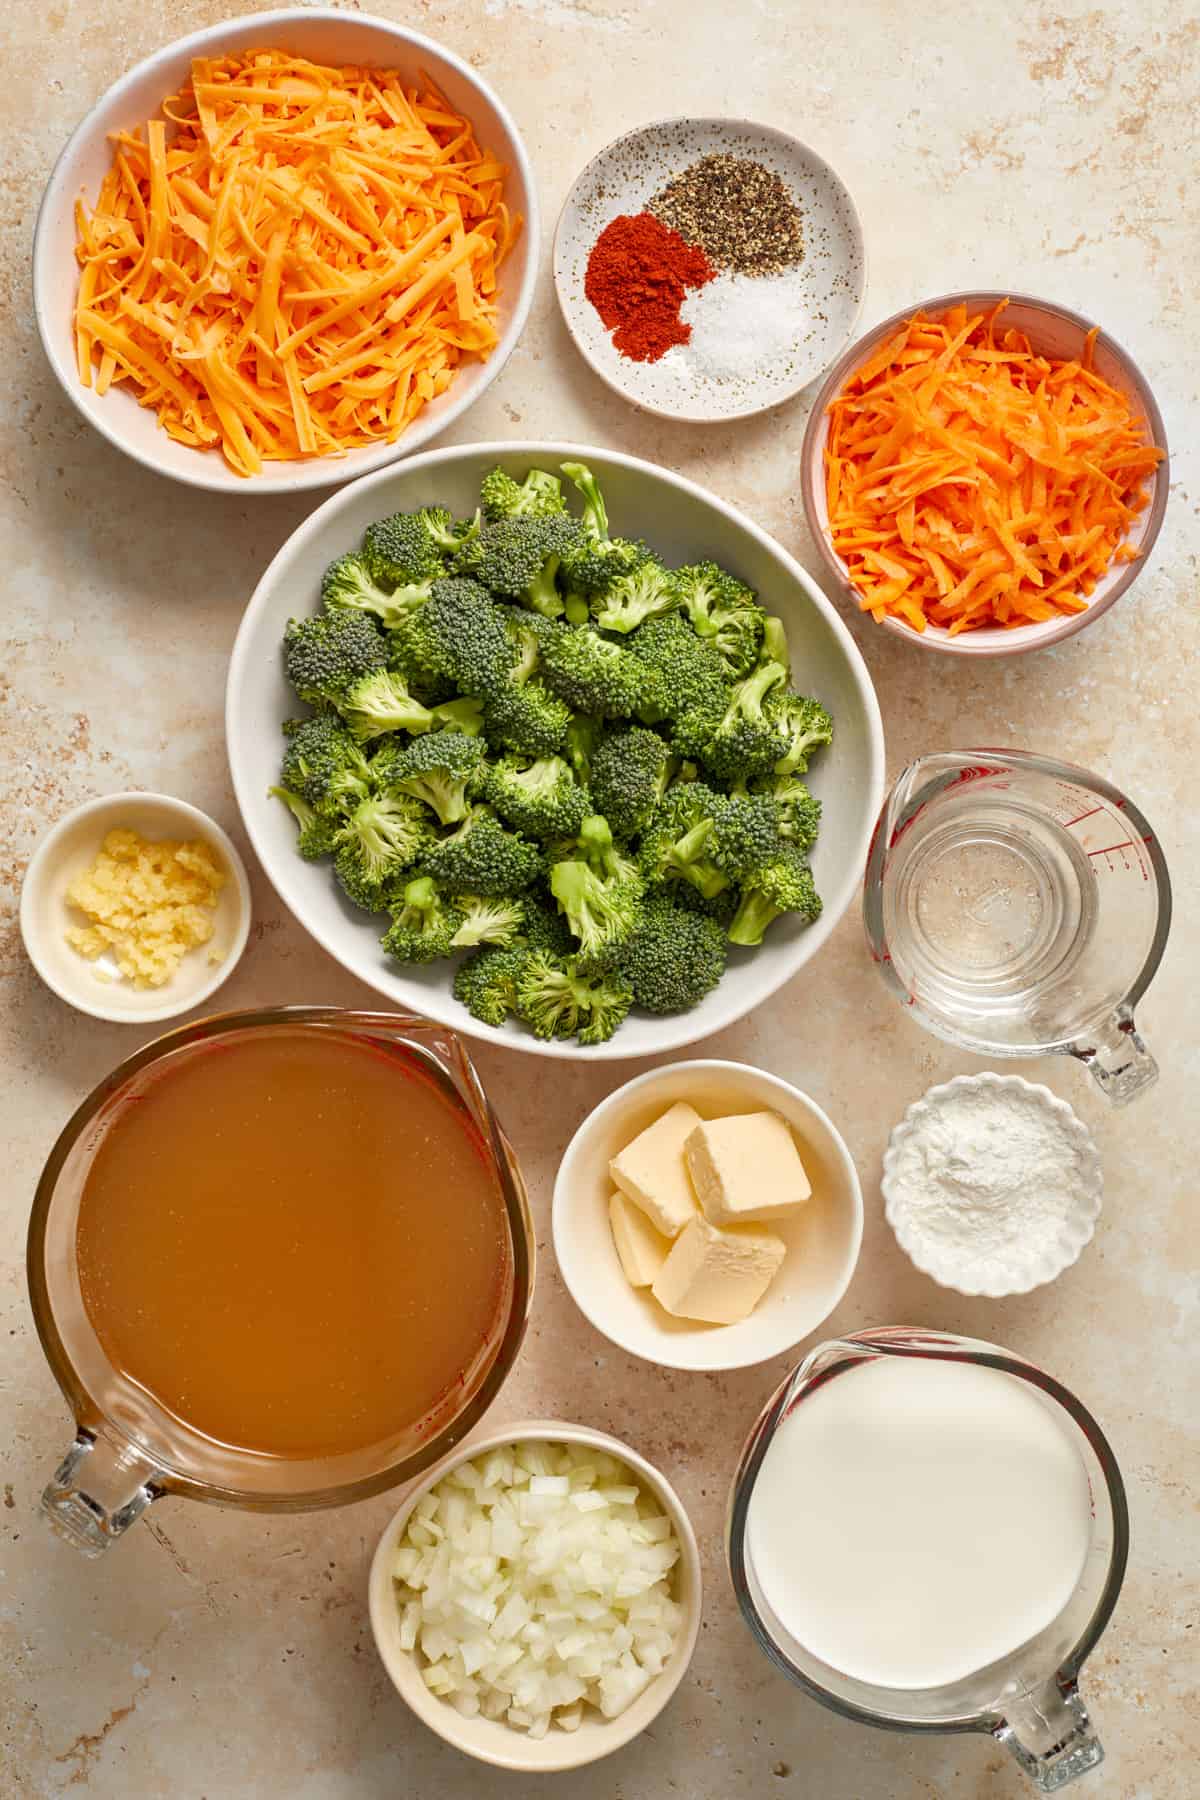 Carrots, cheese, butter, broth, broccoli and other soup ingredients arranged on surface to be used in recipe.